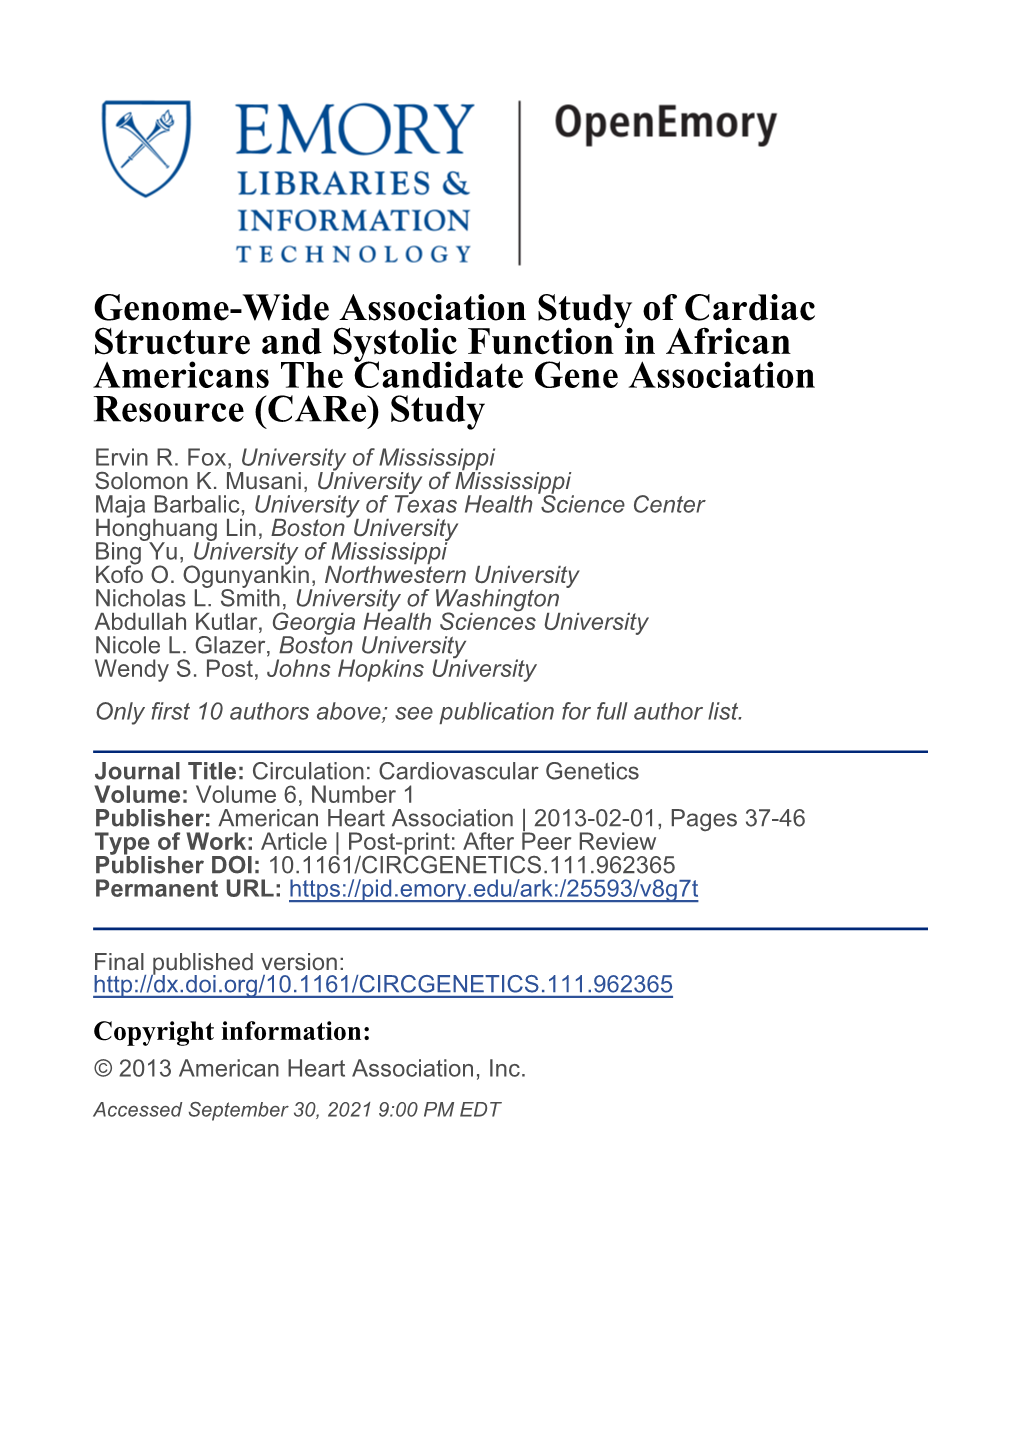 Genome-Wide Association Study of Cardiac Structure and Systolic Function in African Americans the Candidate Gene Association Resource (Care) Study Ervin R